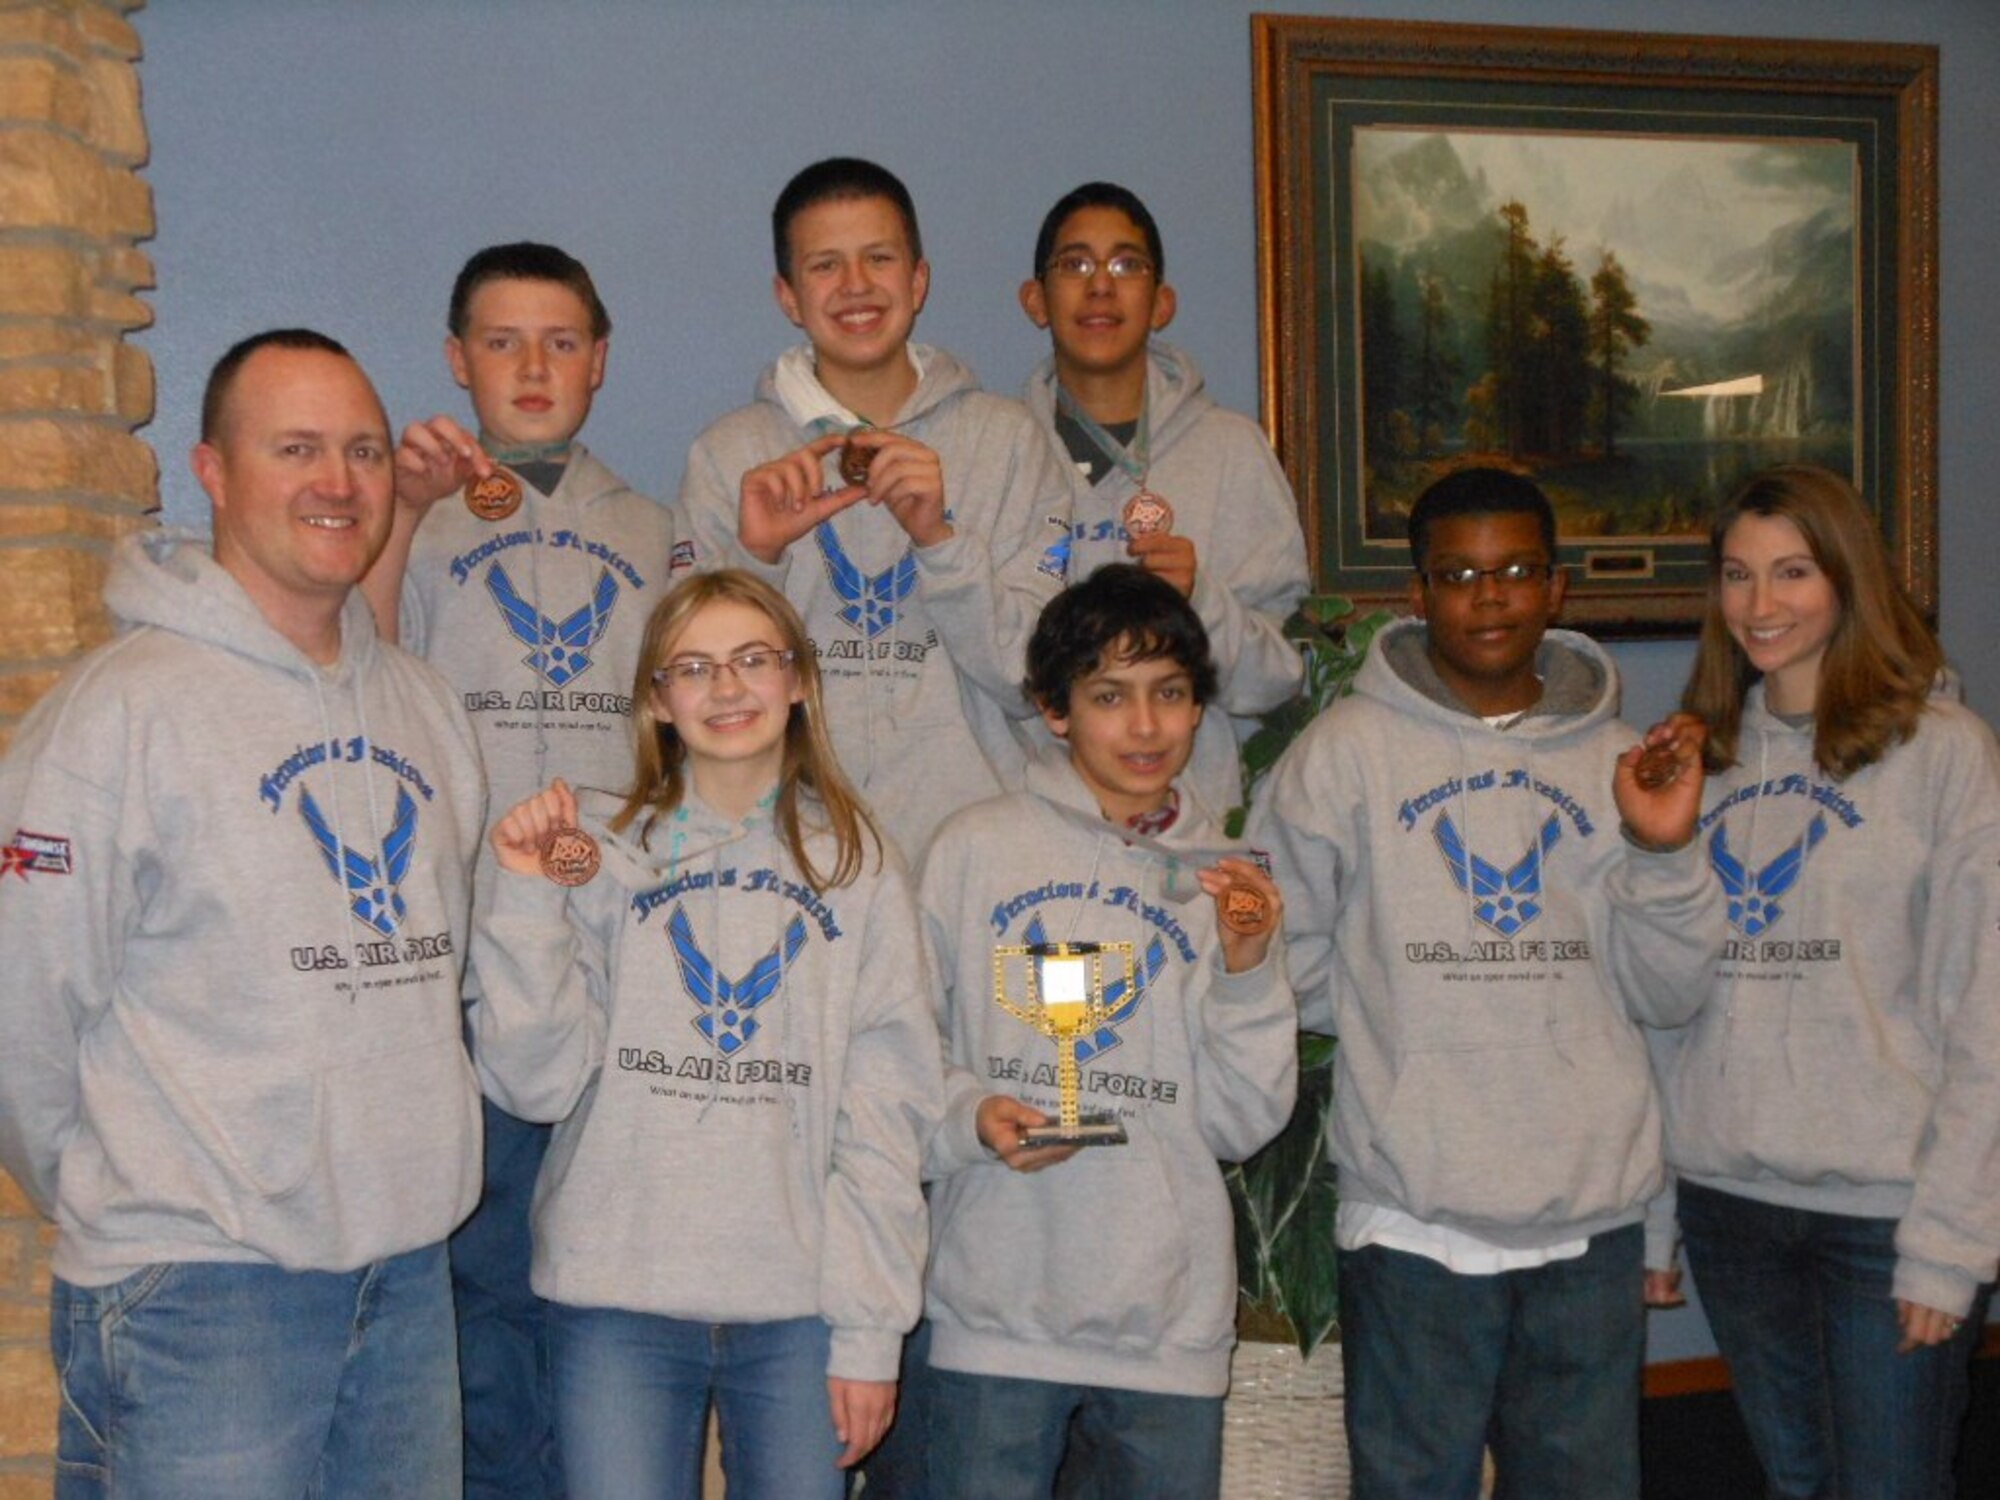 MINOT AIR FORCE BASE, N.D. -- The Ferocious Firebirds display their trophy and medals won during a FIRST LEGO League team competition held recently in Grand Forks, N.D. The team of students from Memorial Middle School won first place for Teamwork. Their winning Lego robotics design was an idea to make driving safer for the elderly. (Courtesy photo)